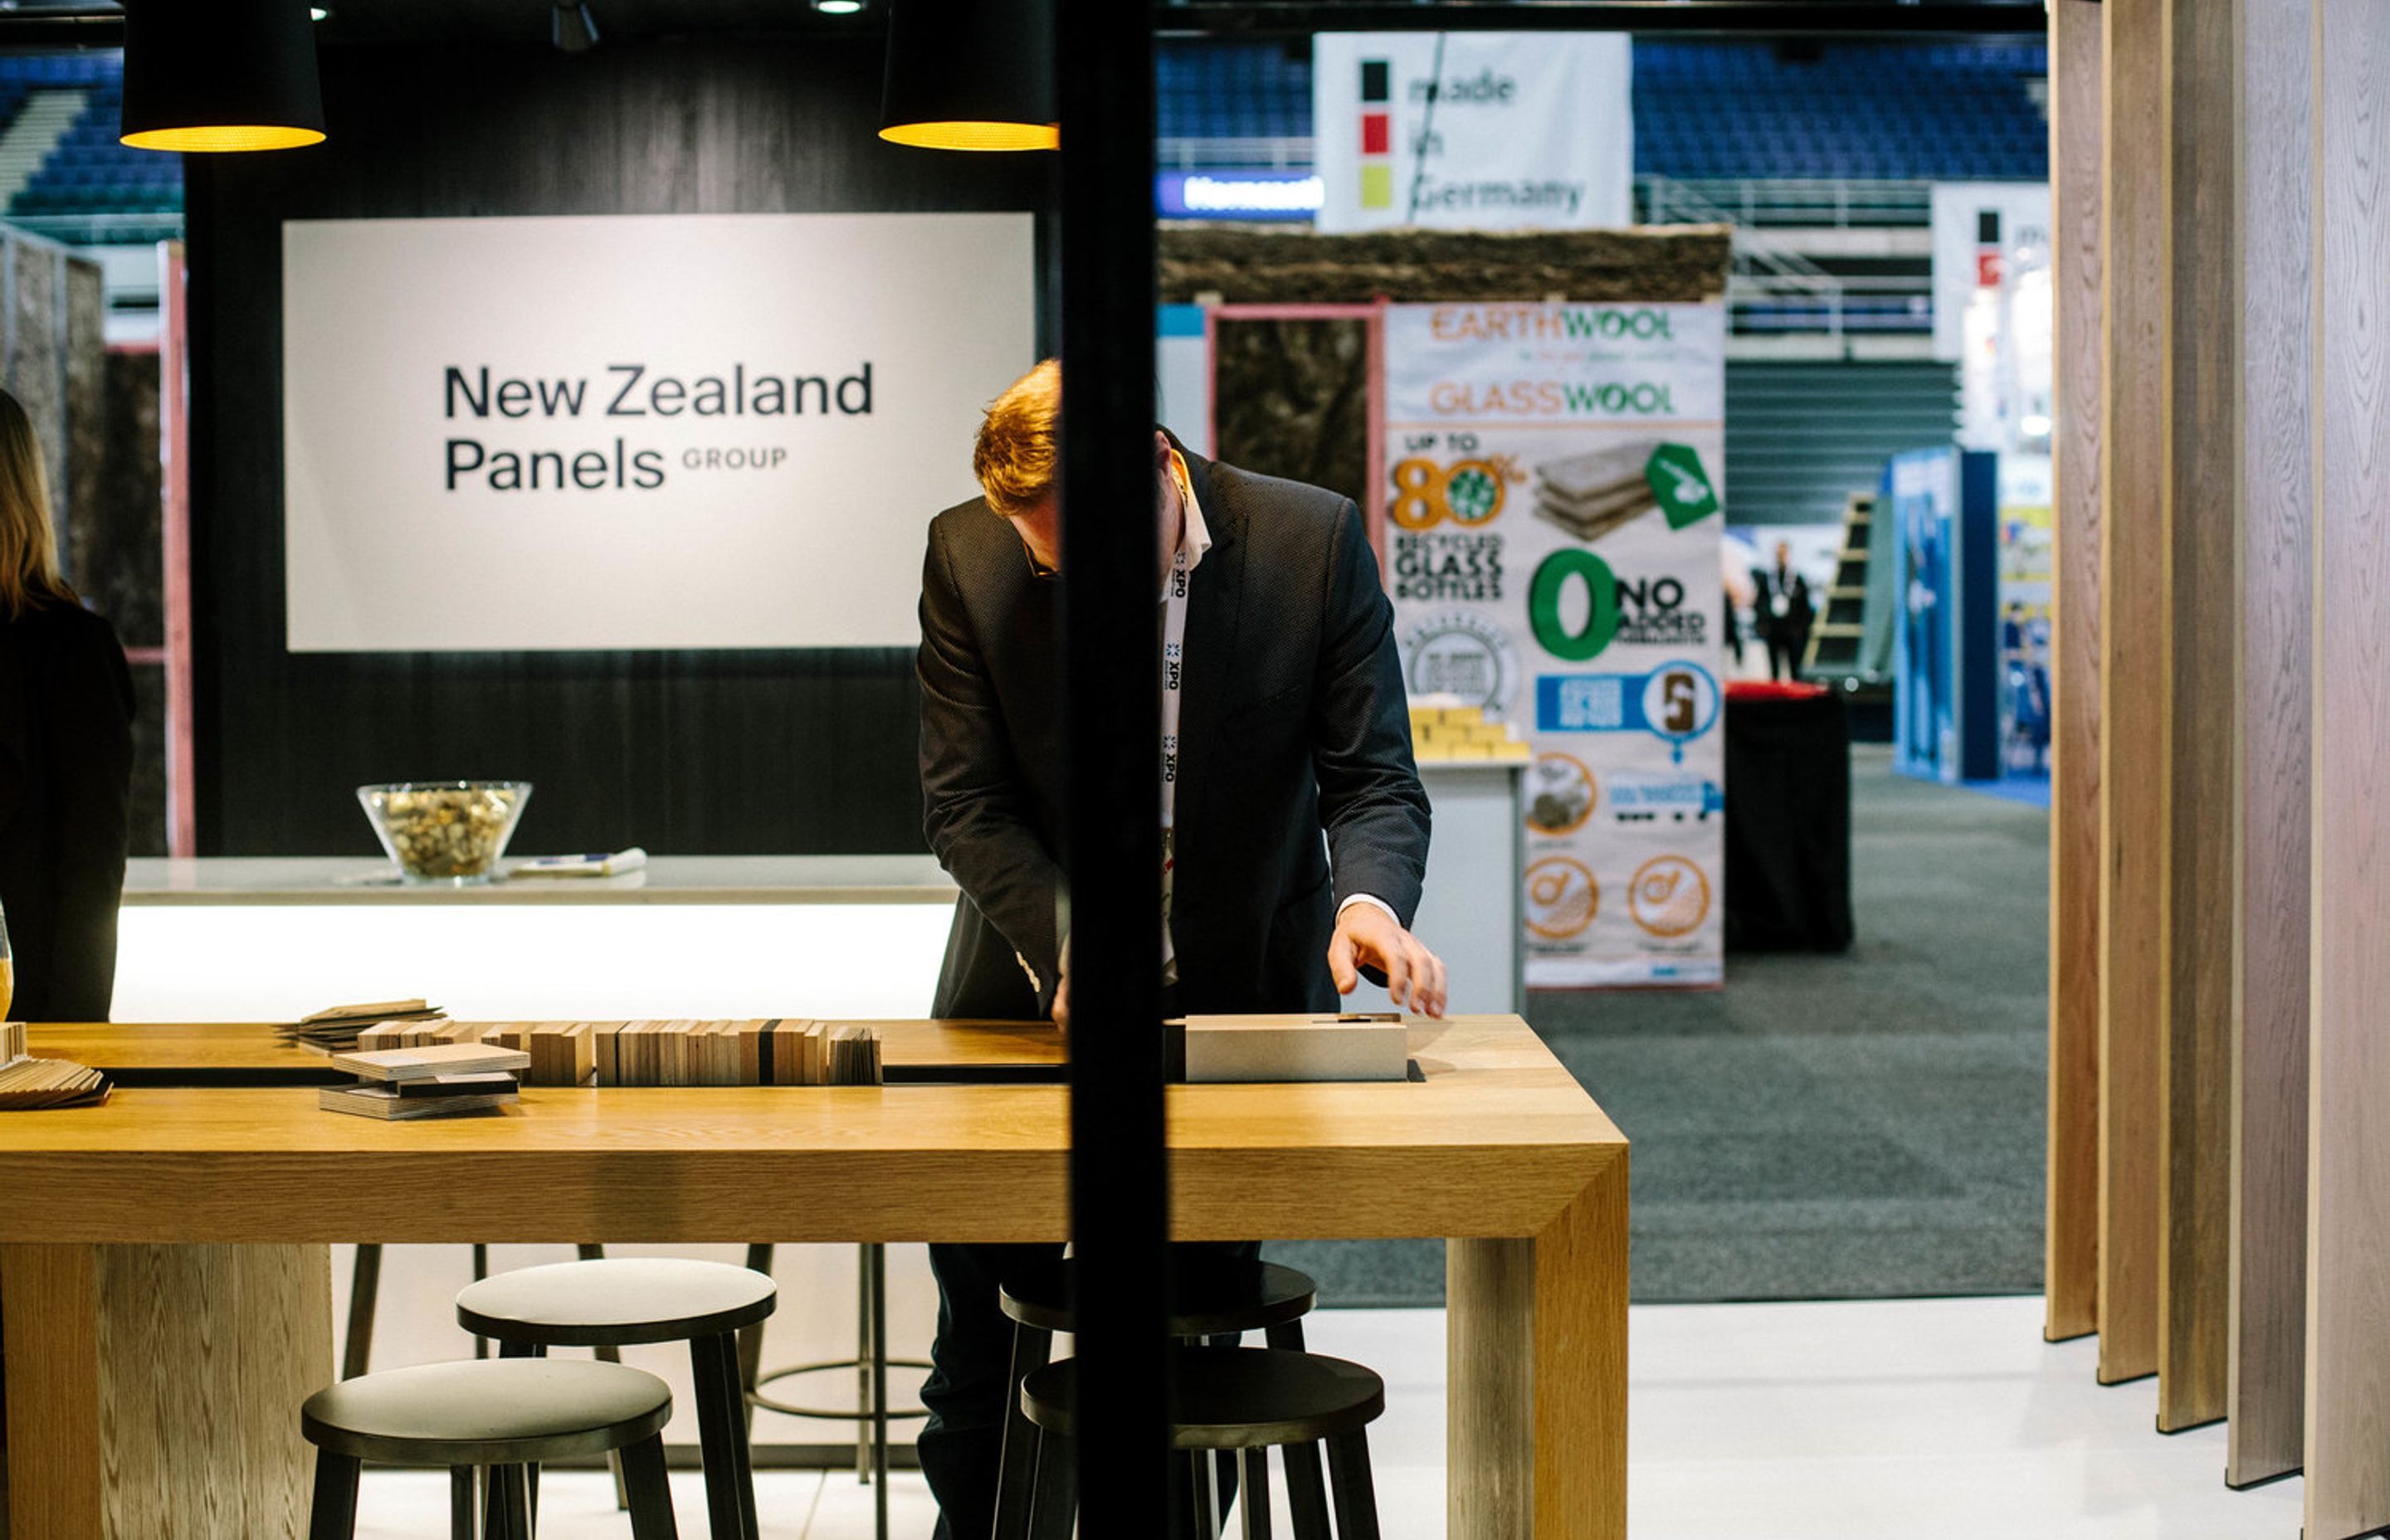 NZ Panels Group Trade Show Stand